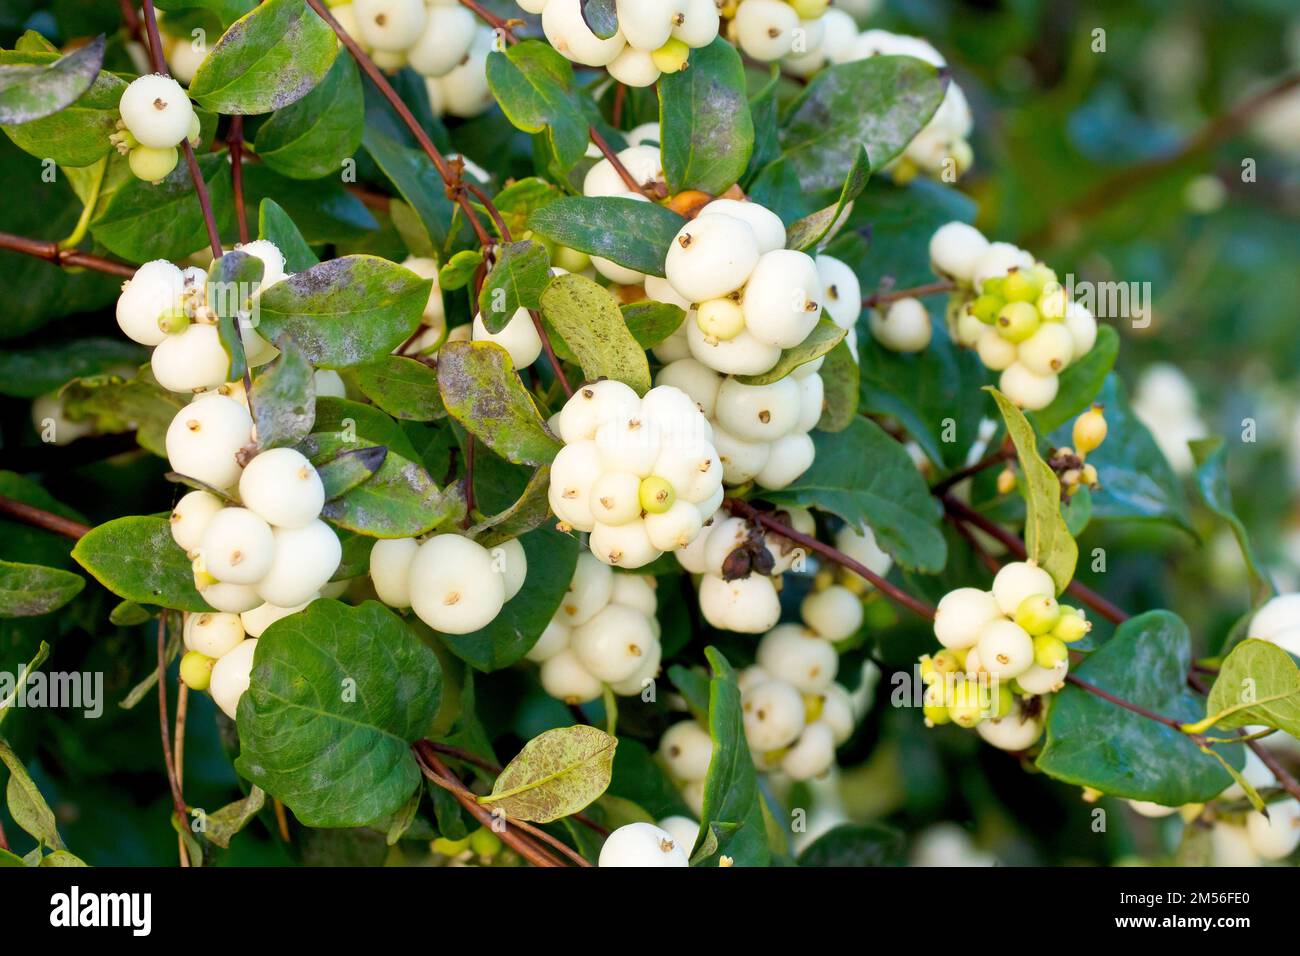 Snowberry (symphoricarpos rivularis), close up showing the clusters of white berries the commonly planted shrub produces during the autumn. Stock Photo